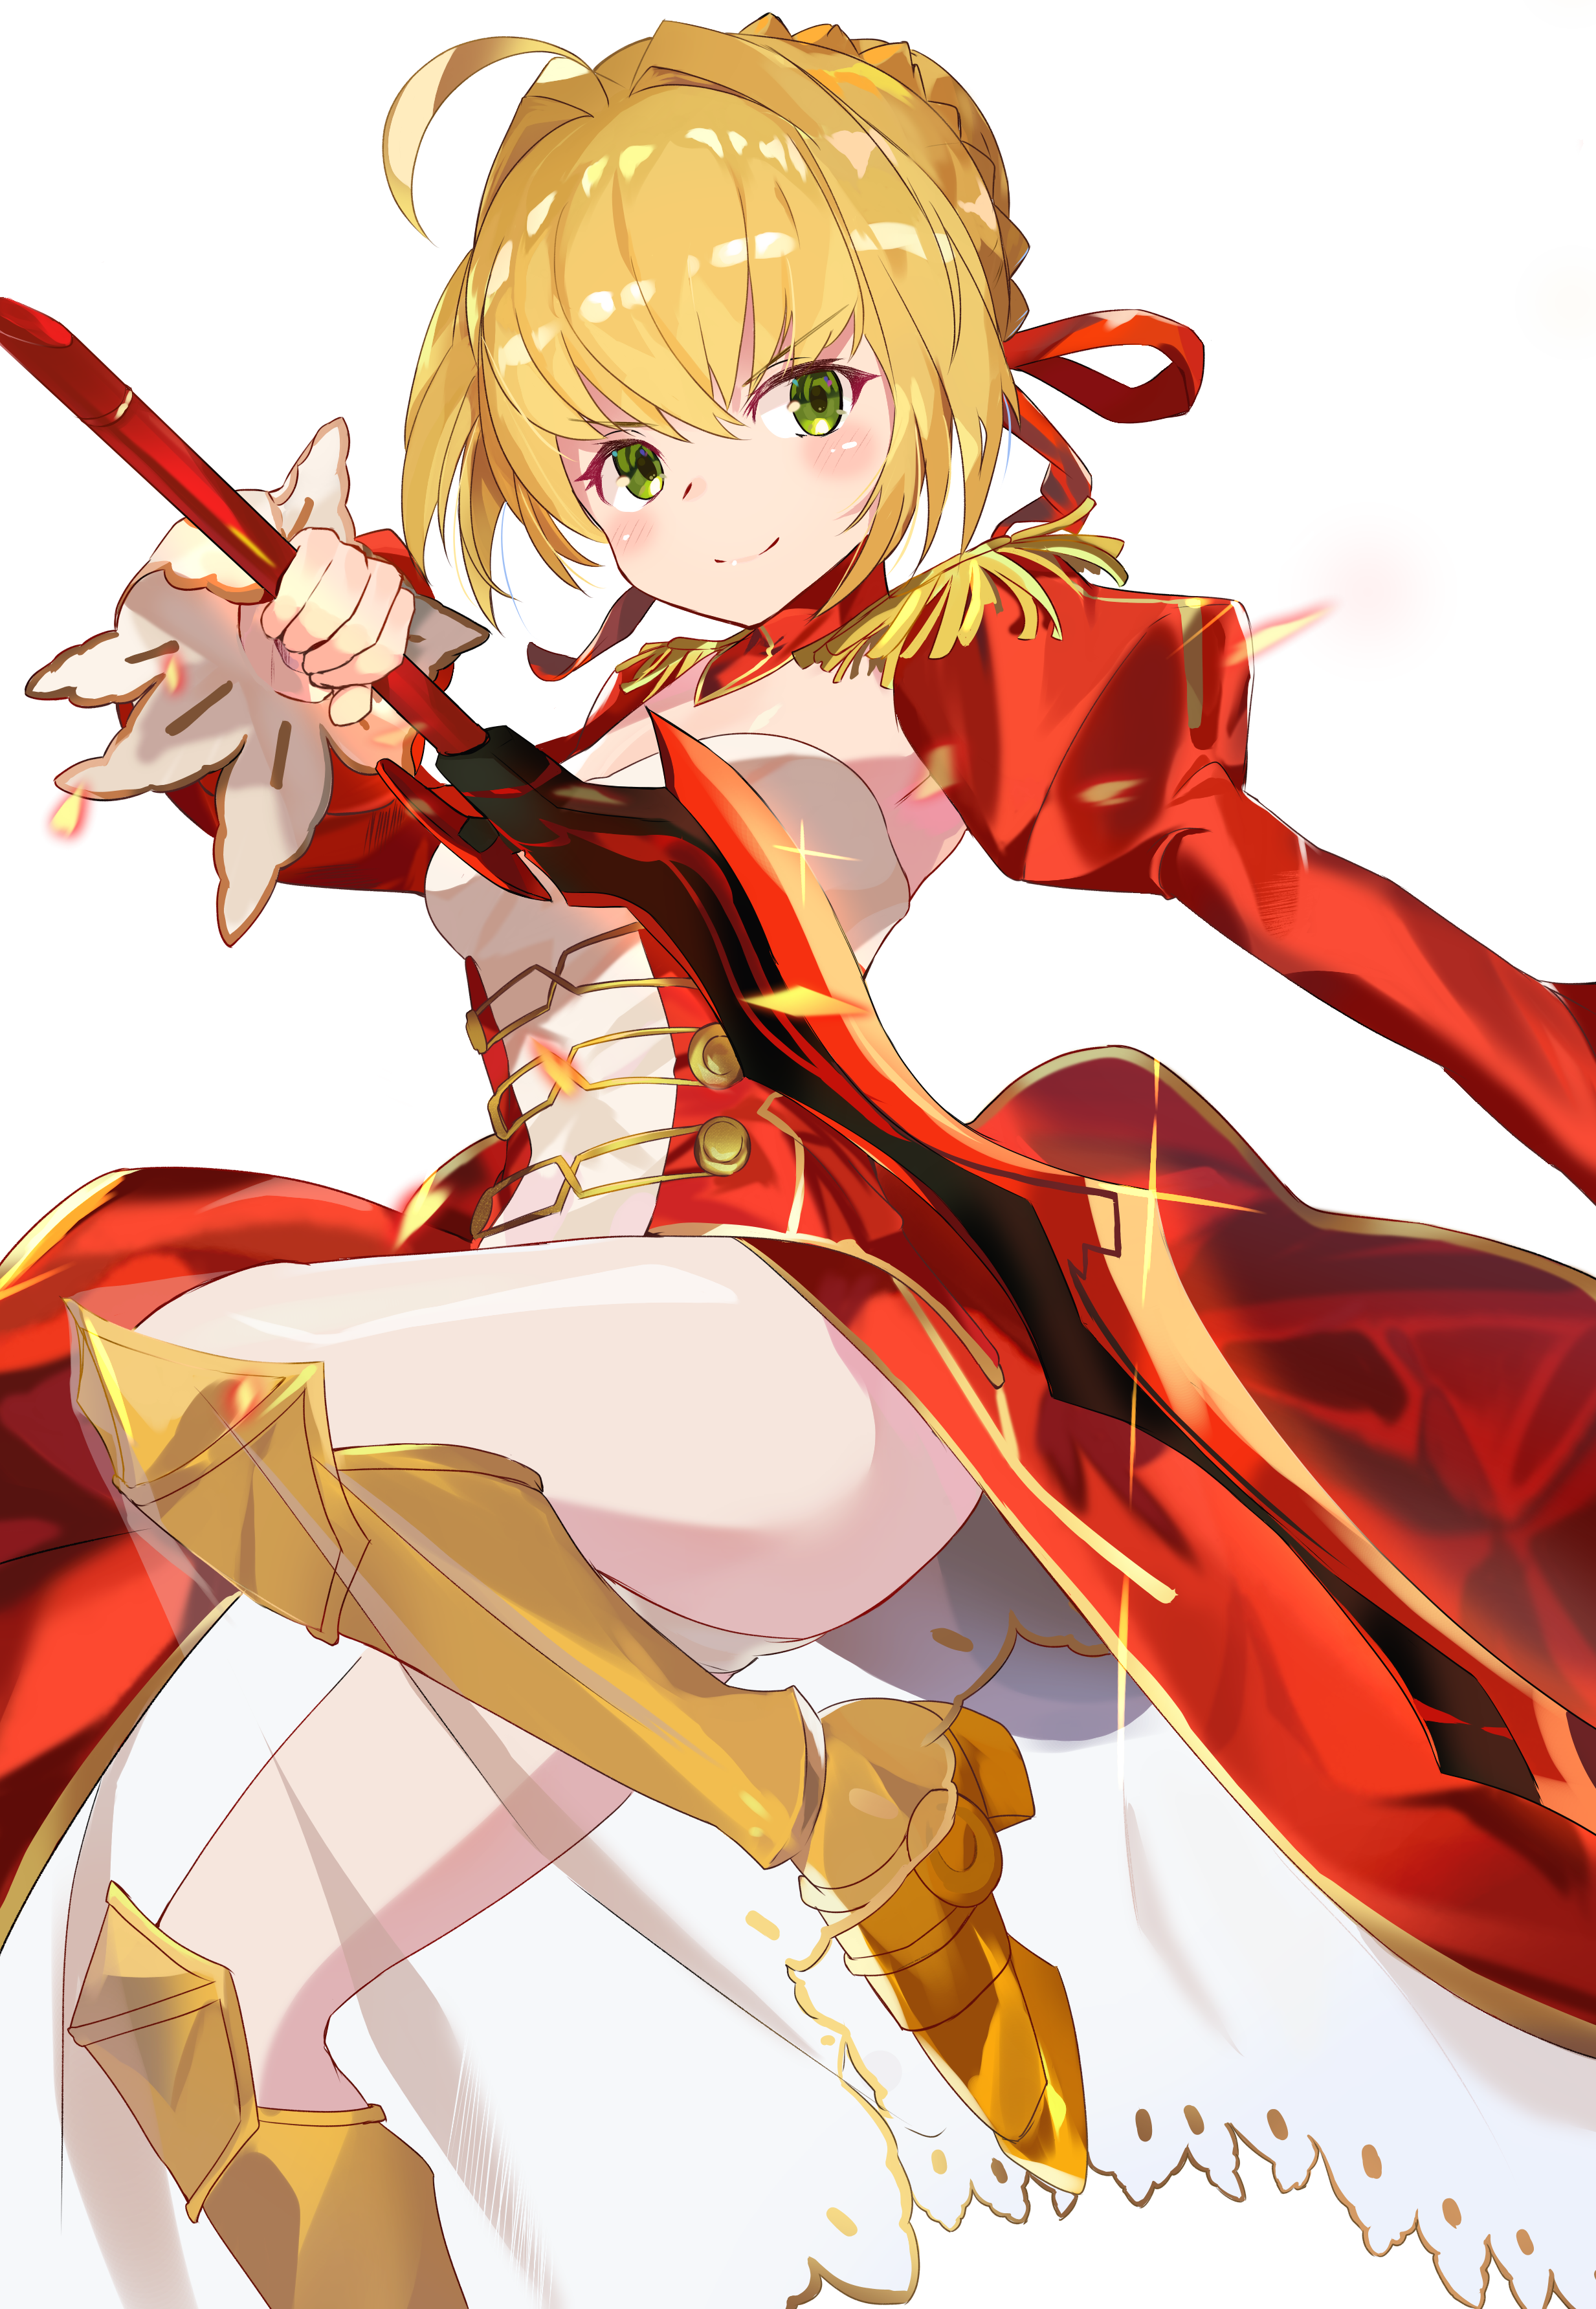 Fatestay night FateExtra Fatehollow ataraxia FateGrand Order FateZero  Anime Fatestay night FateExtra png  PNGEgg